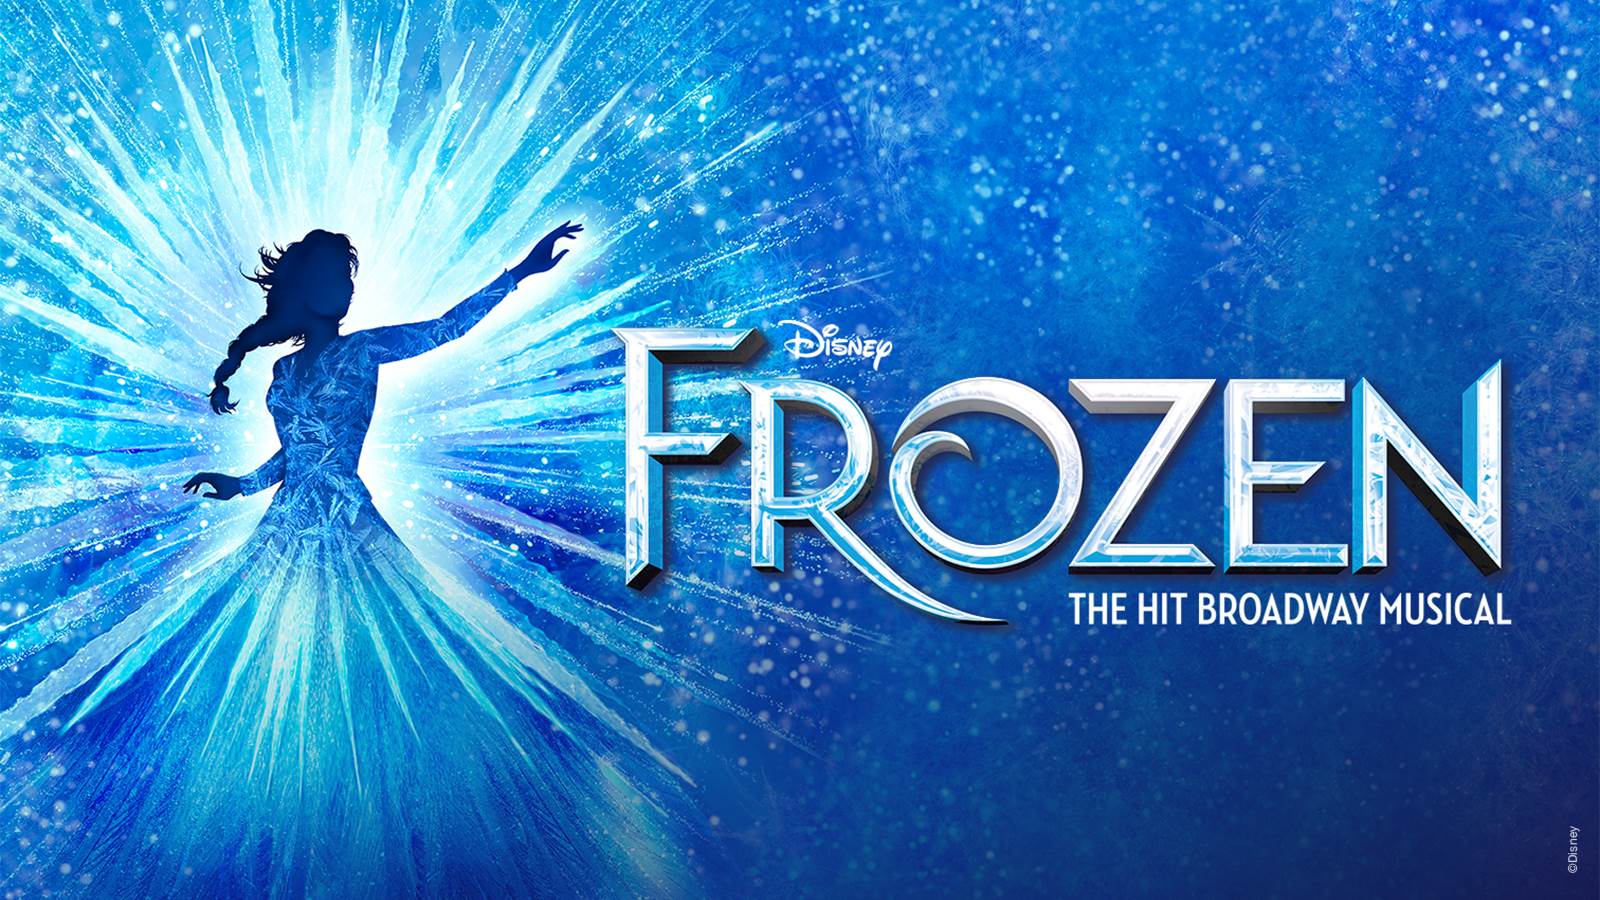 Disney's Frozen logo with princess character illustration to the left. Text below the title says The Hit Broadway Musical.